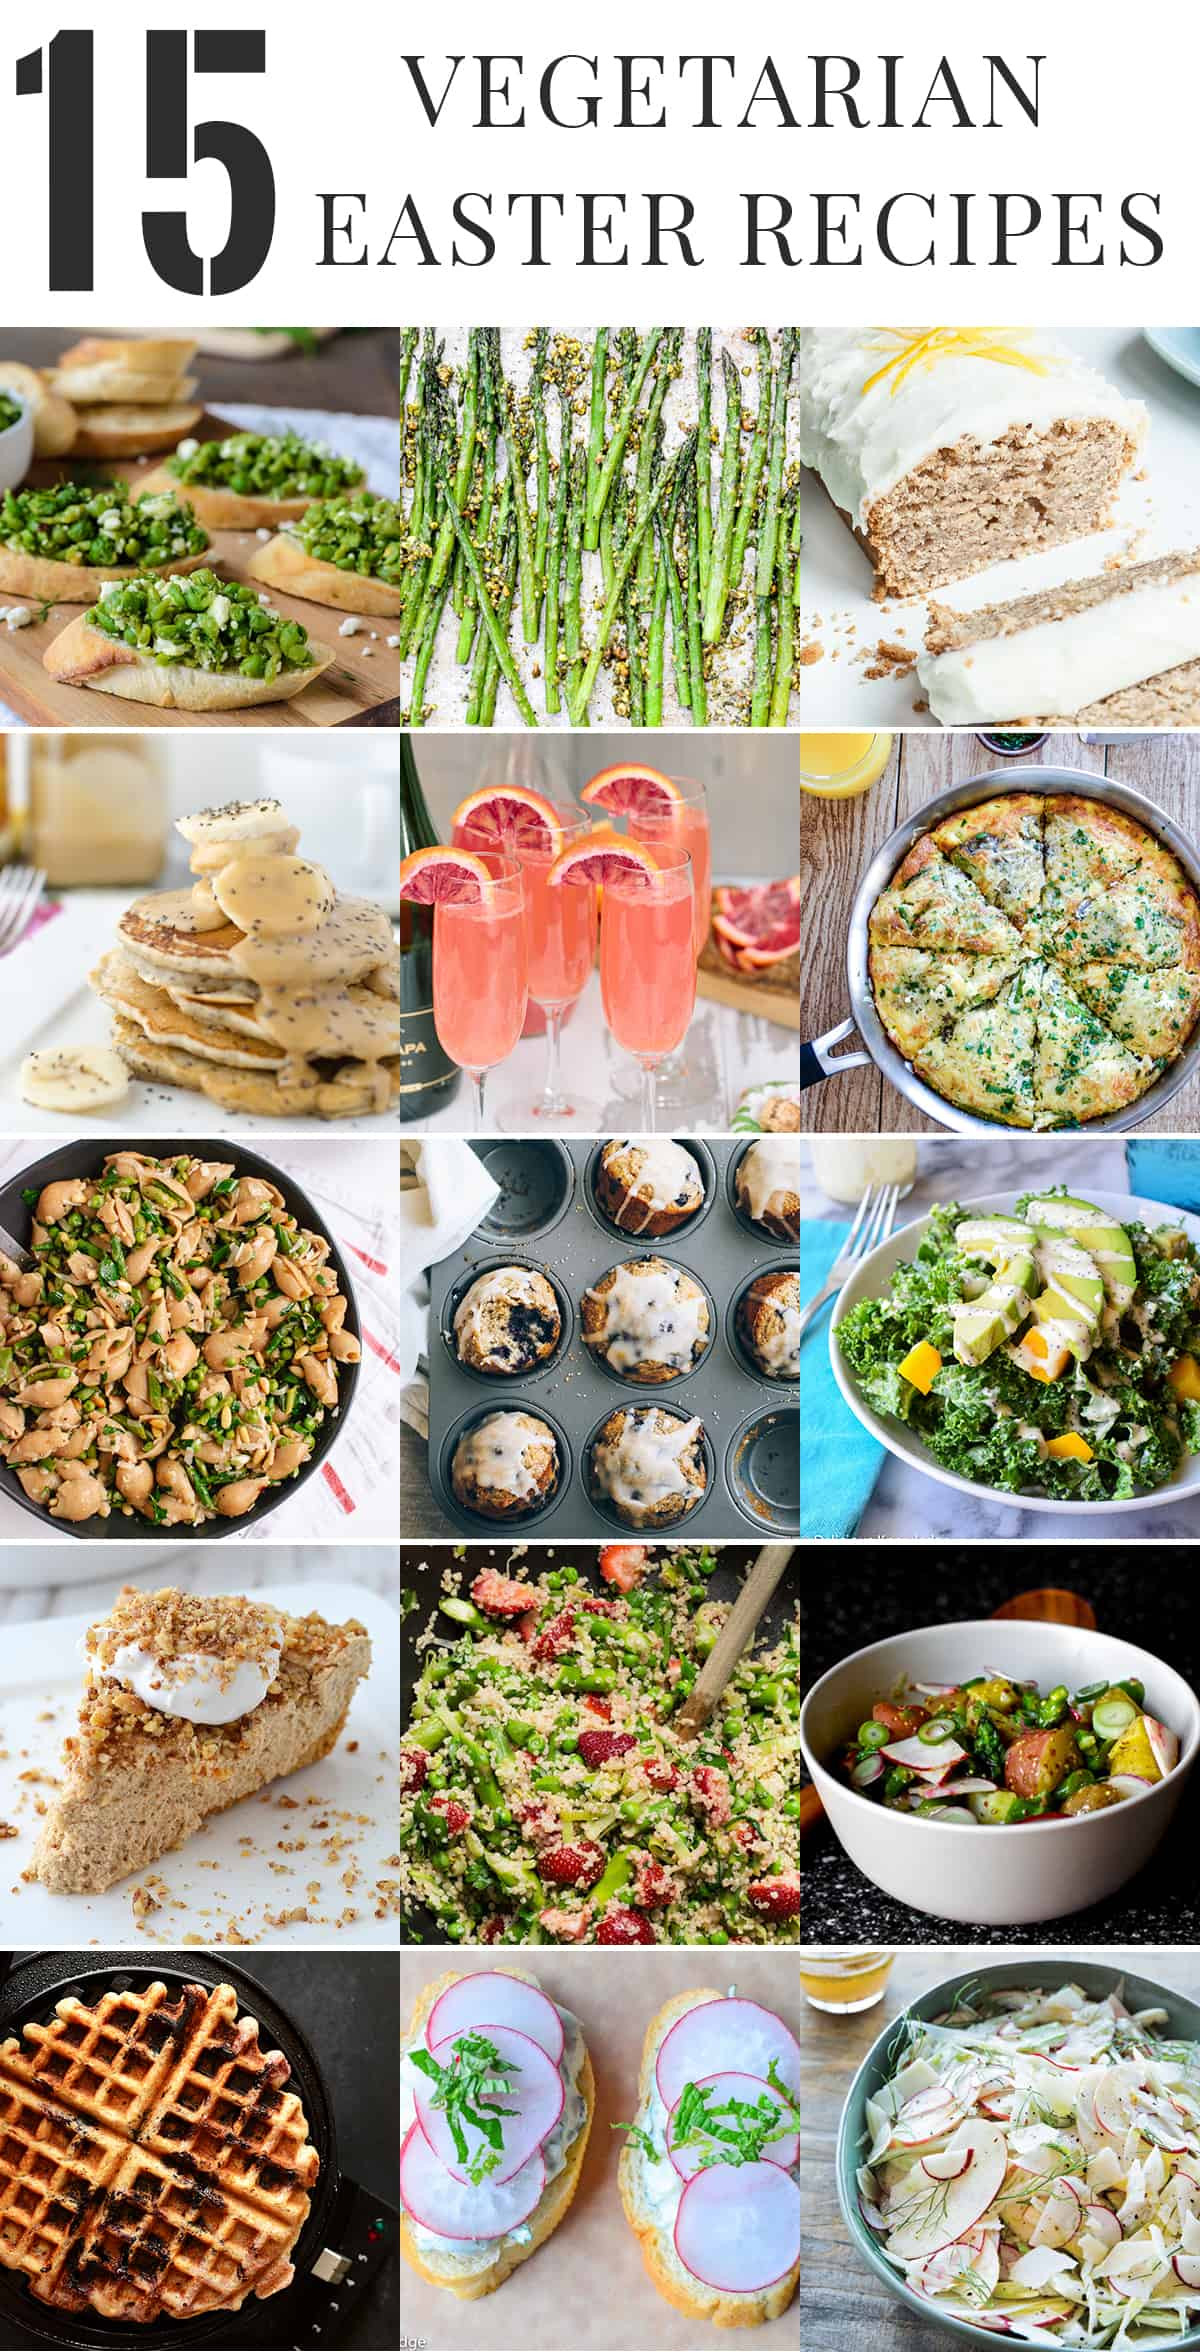 Vegan Easter Dinner Ideas
 Healthy Ve arian Easter Recipes Delish Knowledge